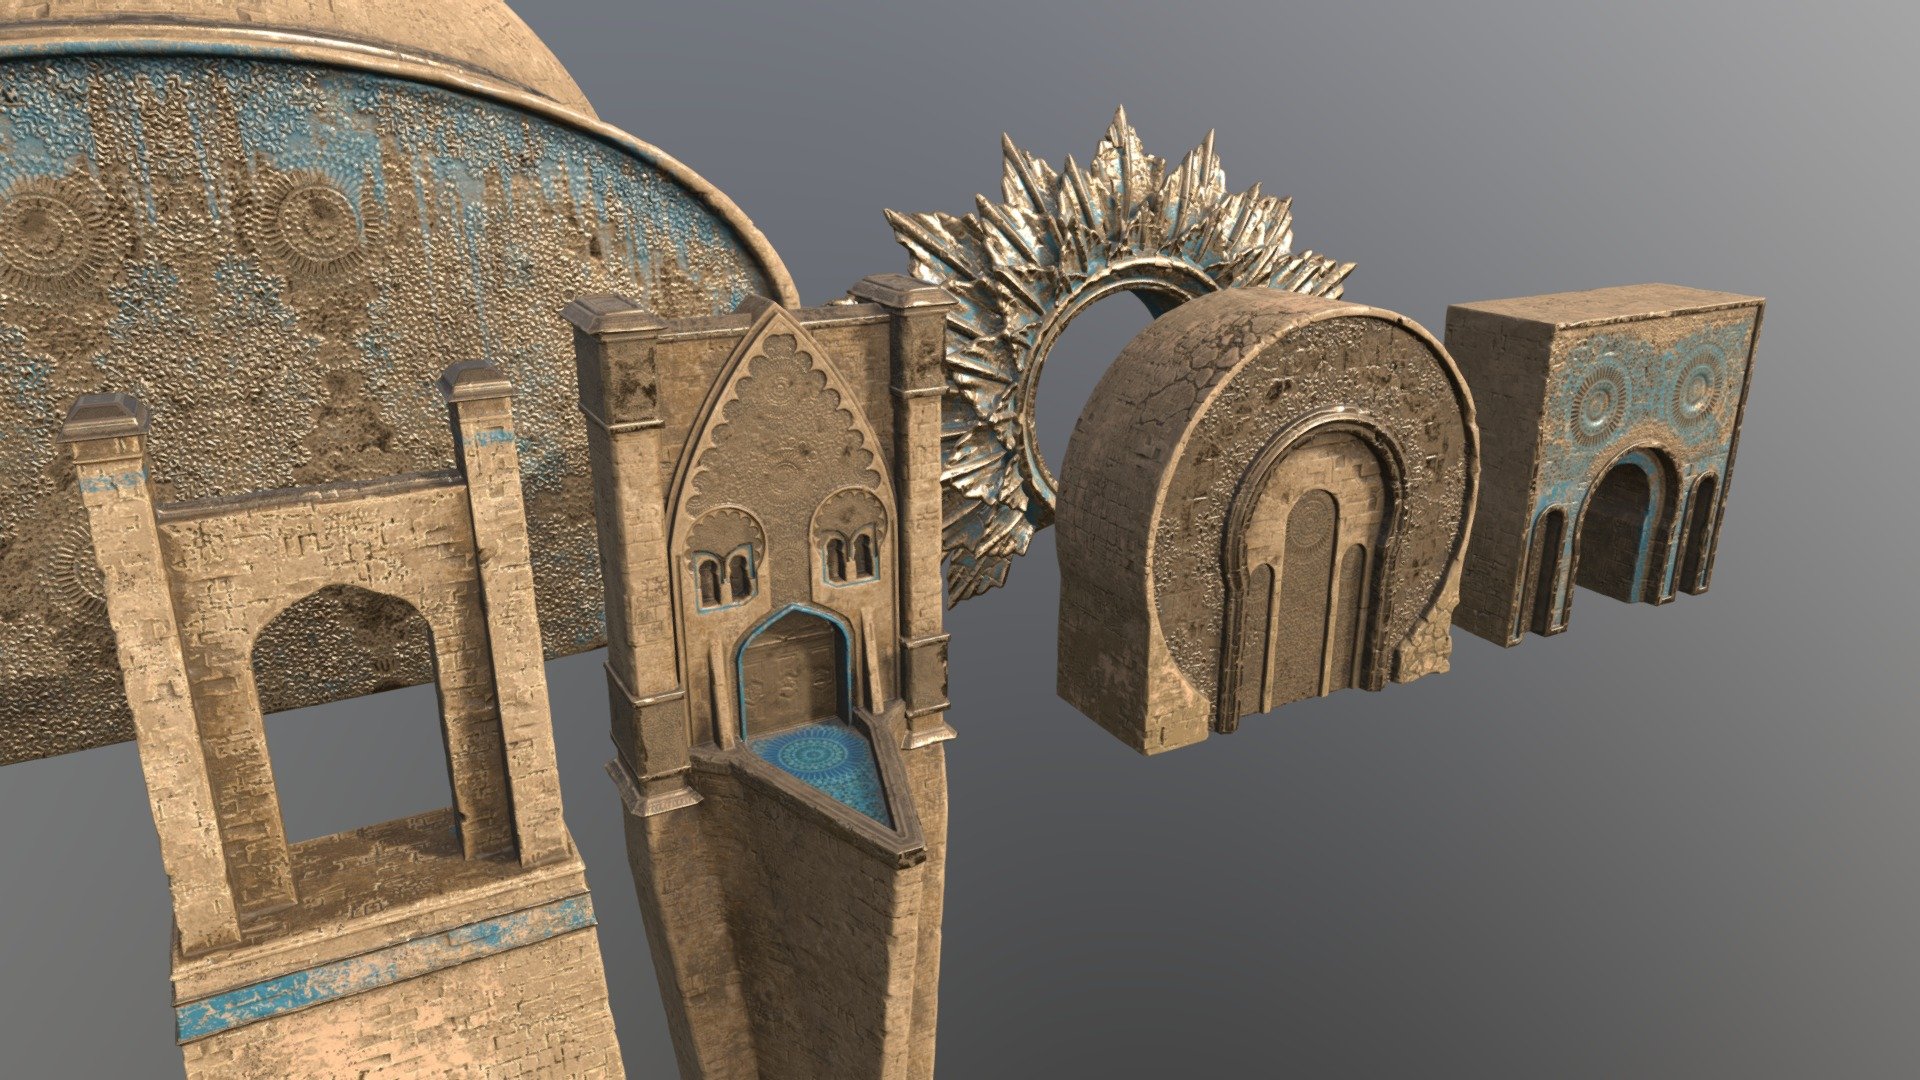 Modular assets created for a personal project: https://www.artstation.com/artwork/kQDQez

Assets were built while learning 3DCoat, so don’t expect super quality. They should be good enough for medium distances and concept 3D-bashing stuff.

Normal maps are OpenGL

These modules are part of a full kit. Please see: https://sketchfab.com/nkilstrup/collections/desert-fortress-ba90e96b86fa4c81b294f881d5e09563 - Desert Fortress Gates - Download Free 3D model by Nicolai Kilstrup (@nkilstrup) 3d model